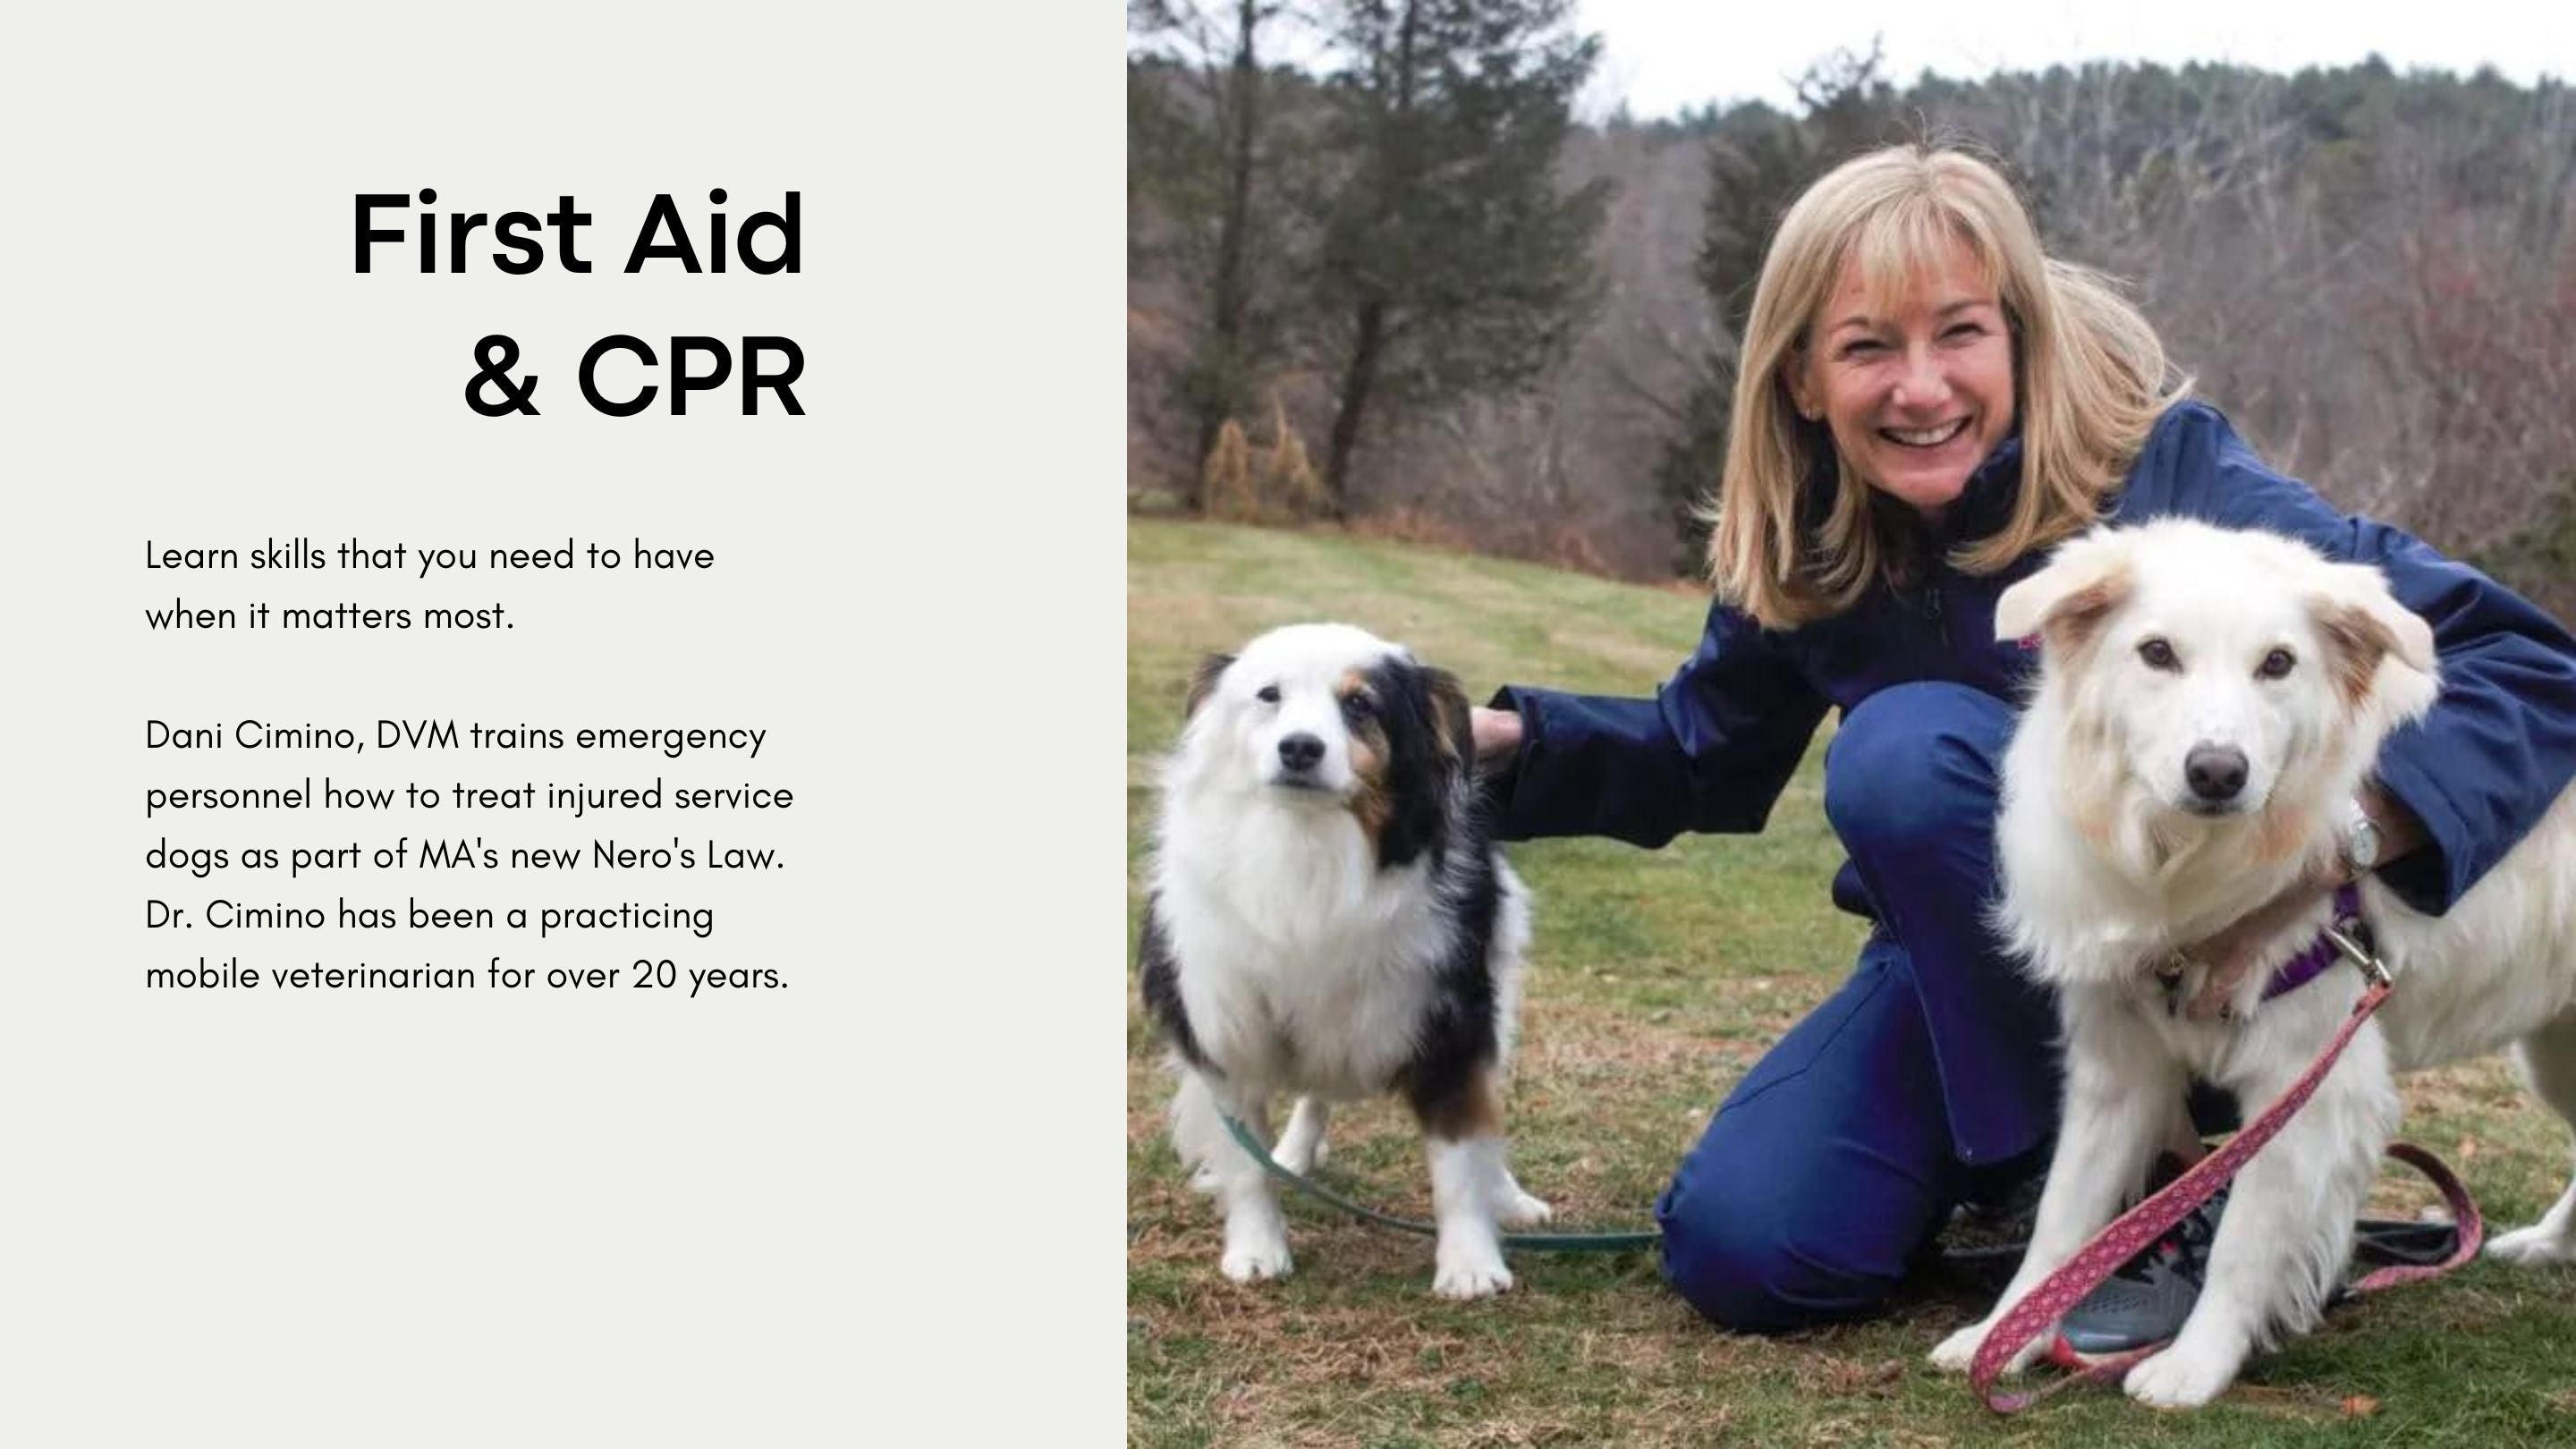 Dani Cimino DVM speaks at the pet health nutrition first aid and CPR workshop to benefit charity